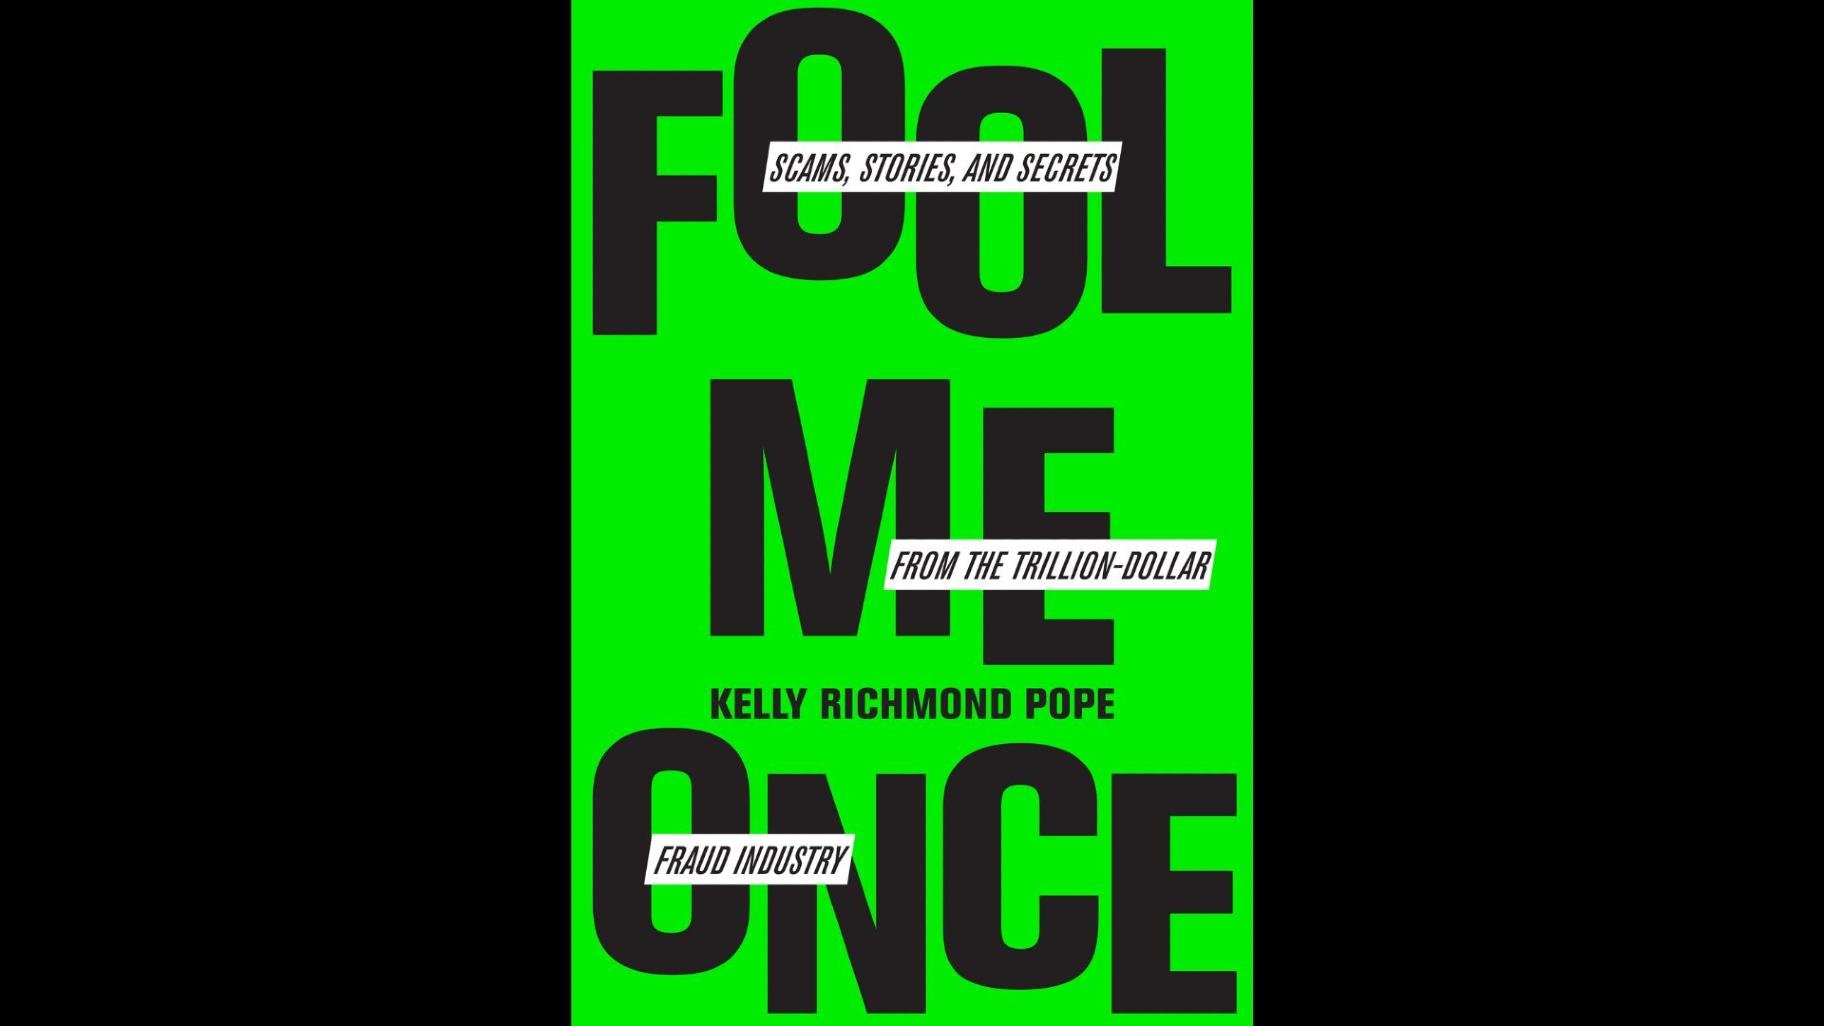 “Fool Me Once: Scams, Stories, and Secrets from the Trillion-Dollar Fraud Industry” by Kelly Richmond Pope.